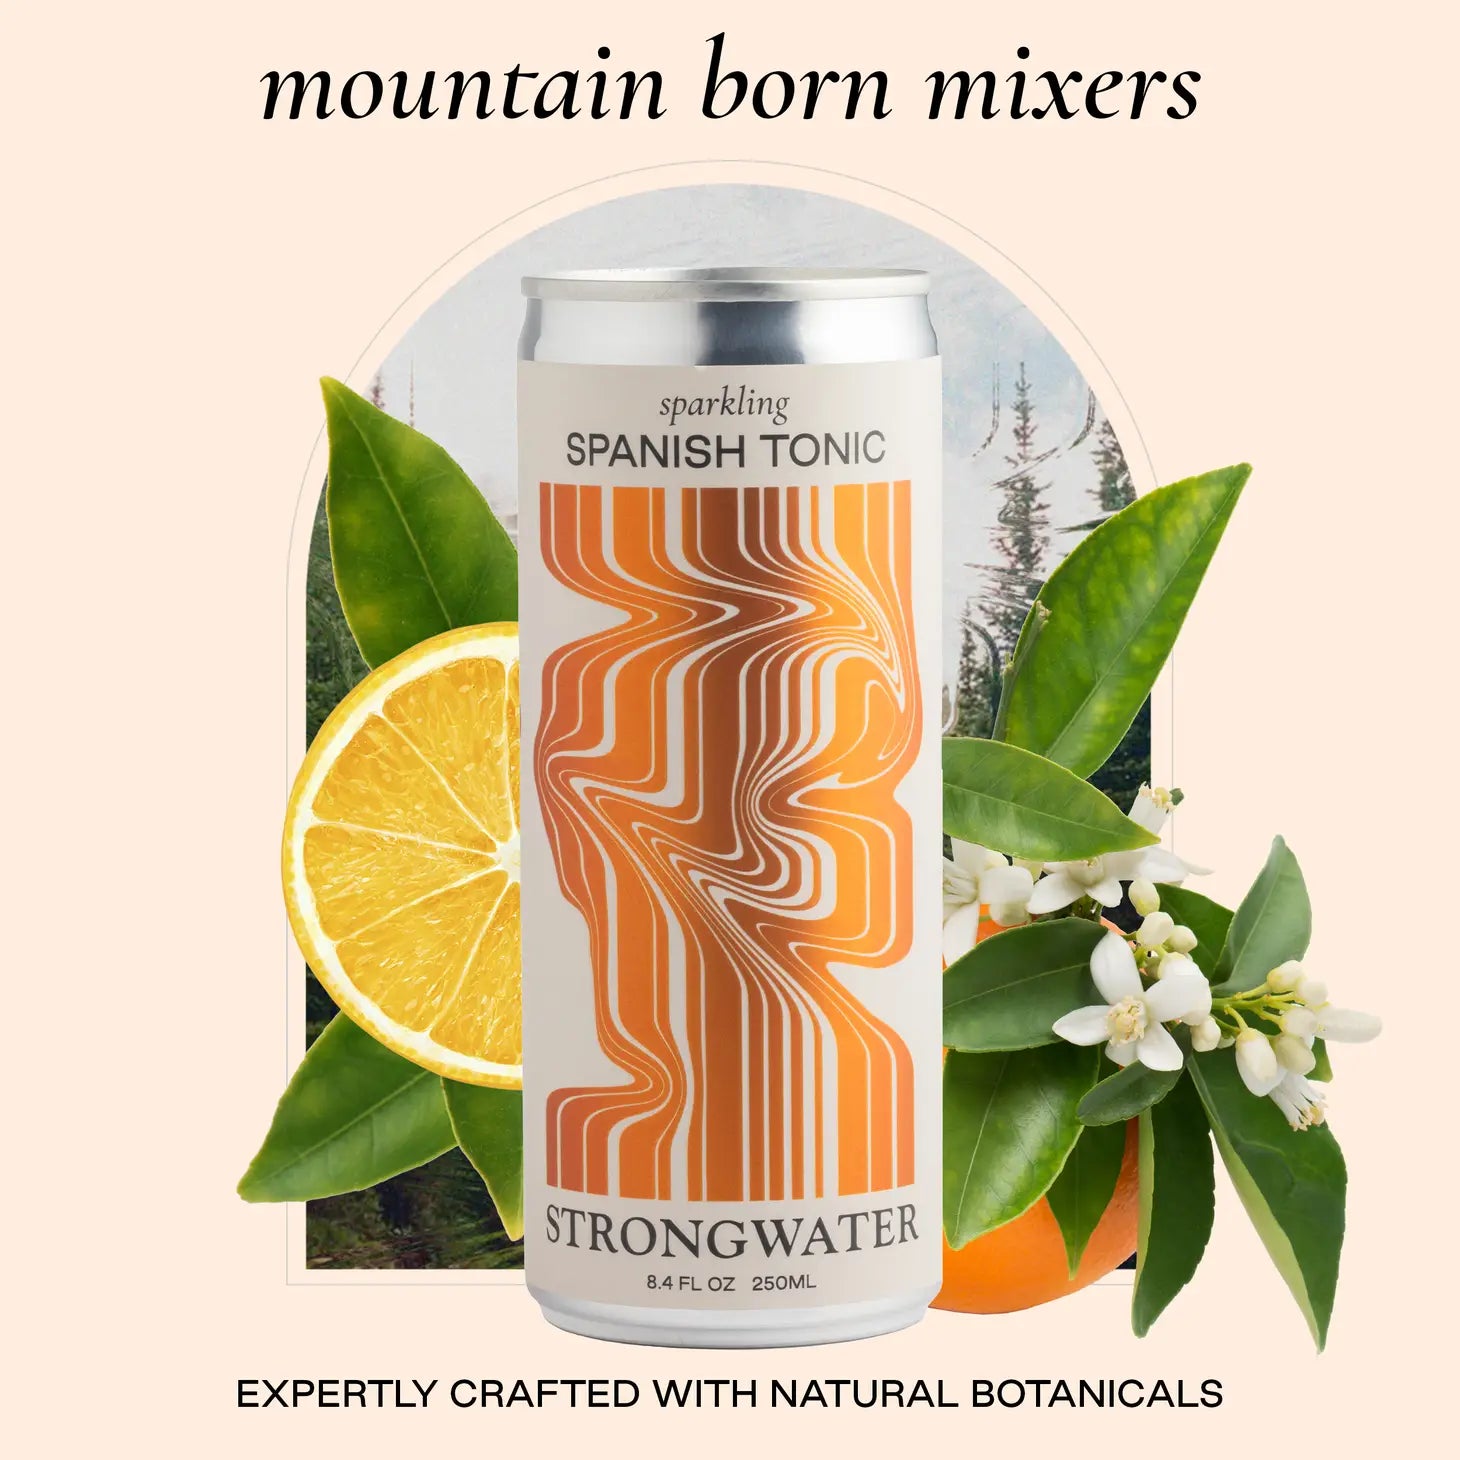 off white graphic that reads Mountain Born Mixers, Expertly Crafted with Natural Botanicals with a can of Spanish Tonic Strongwater in the middle, orange and flowering greenery in the background